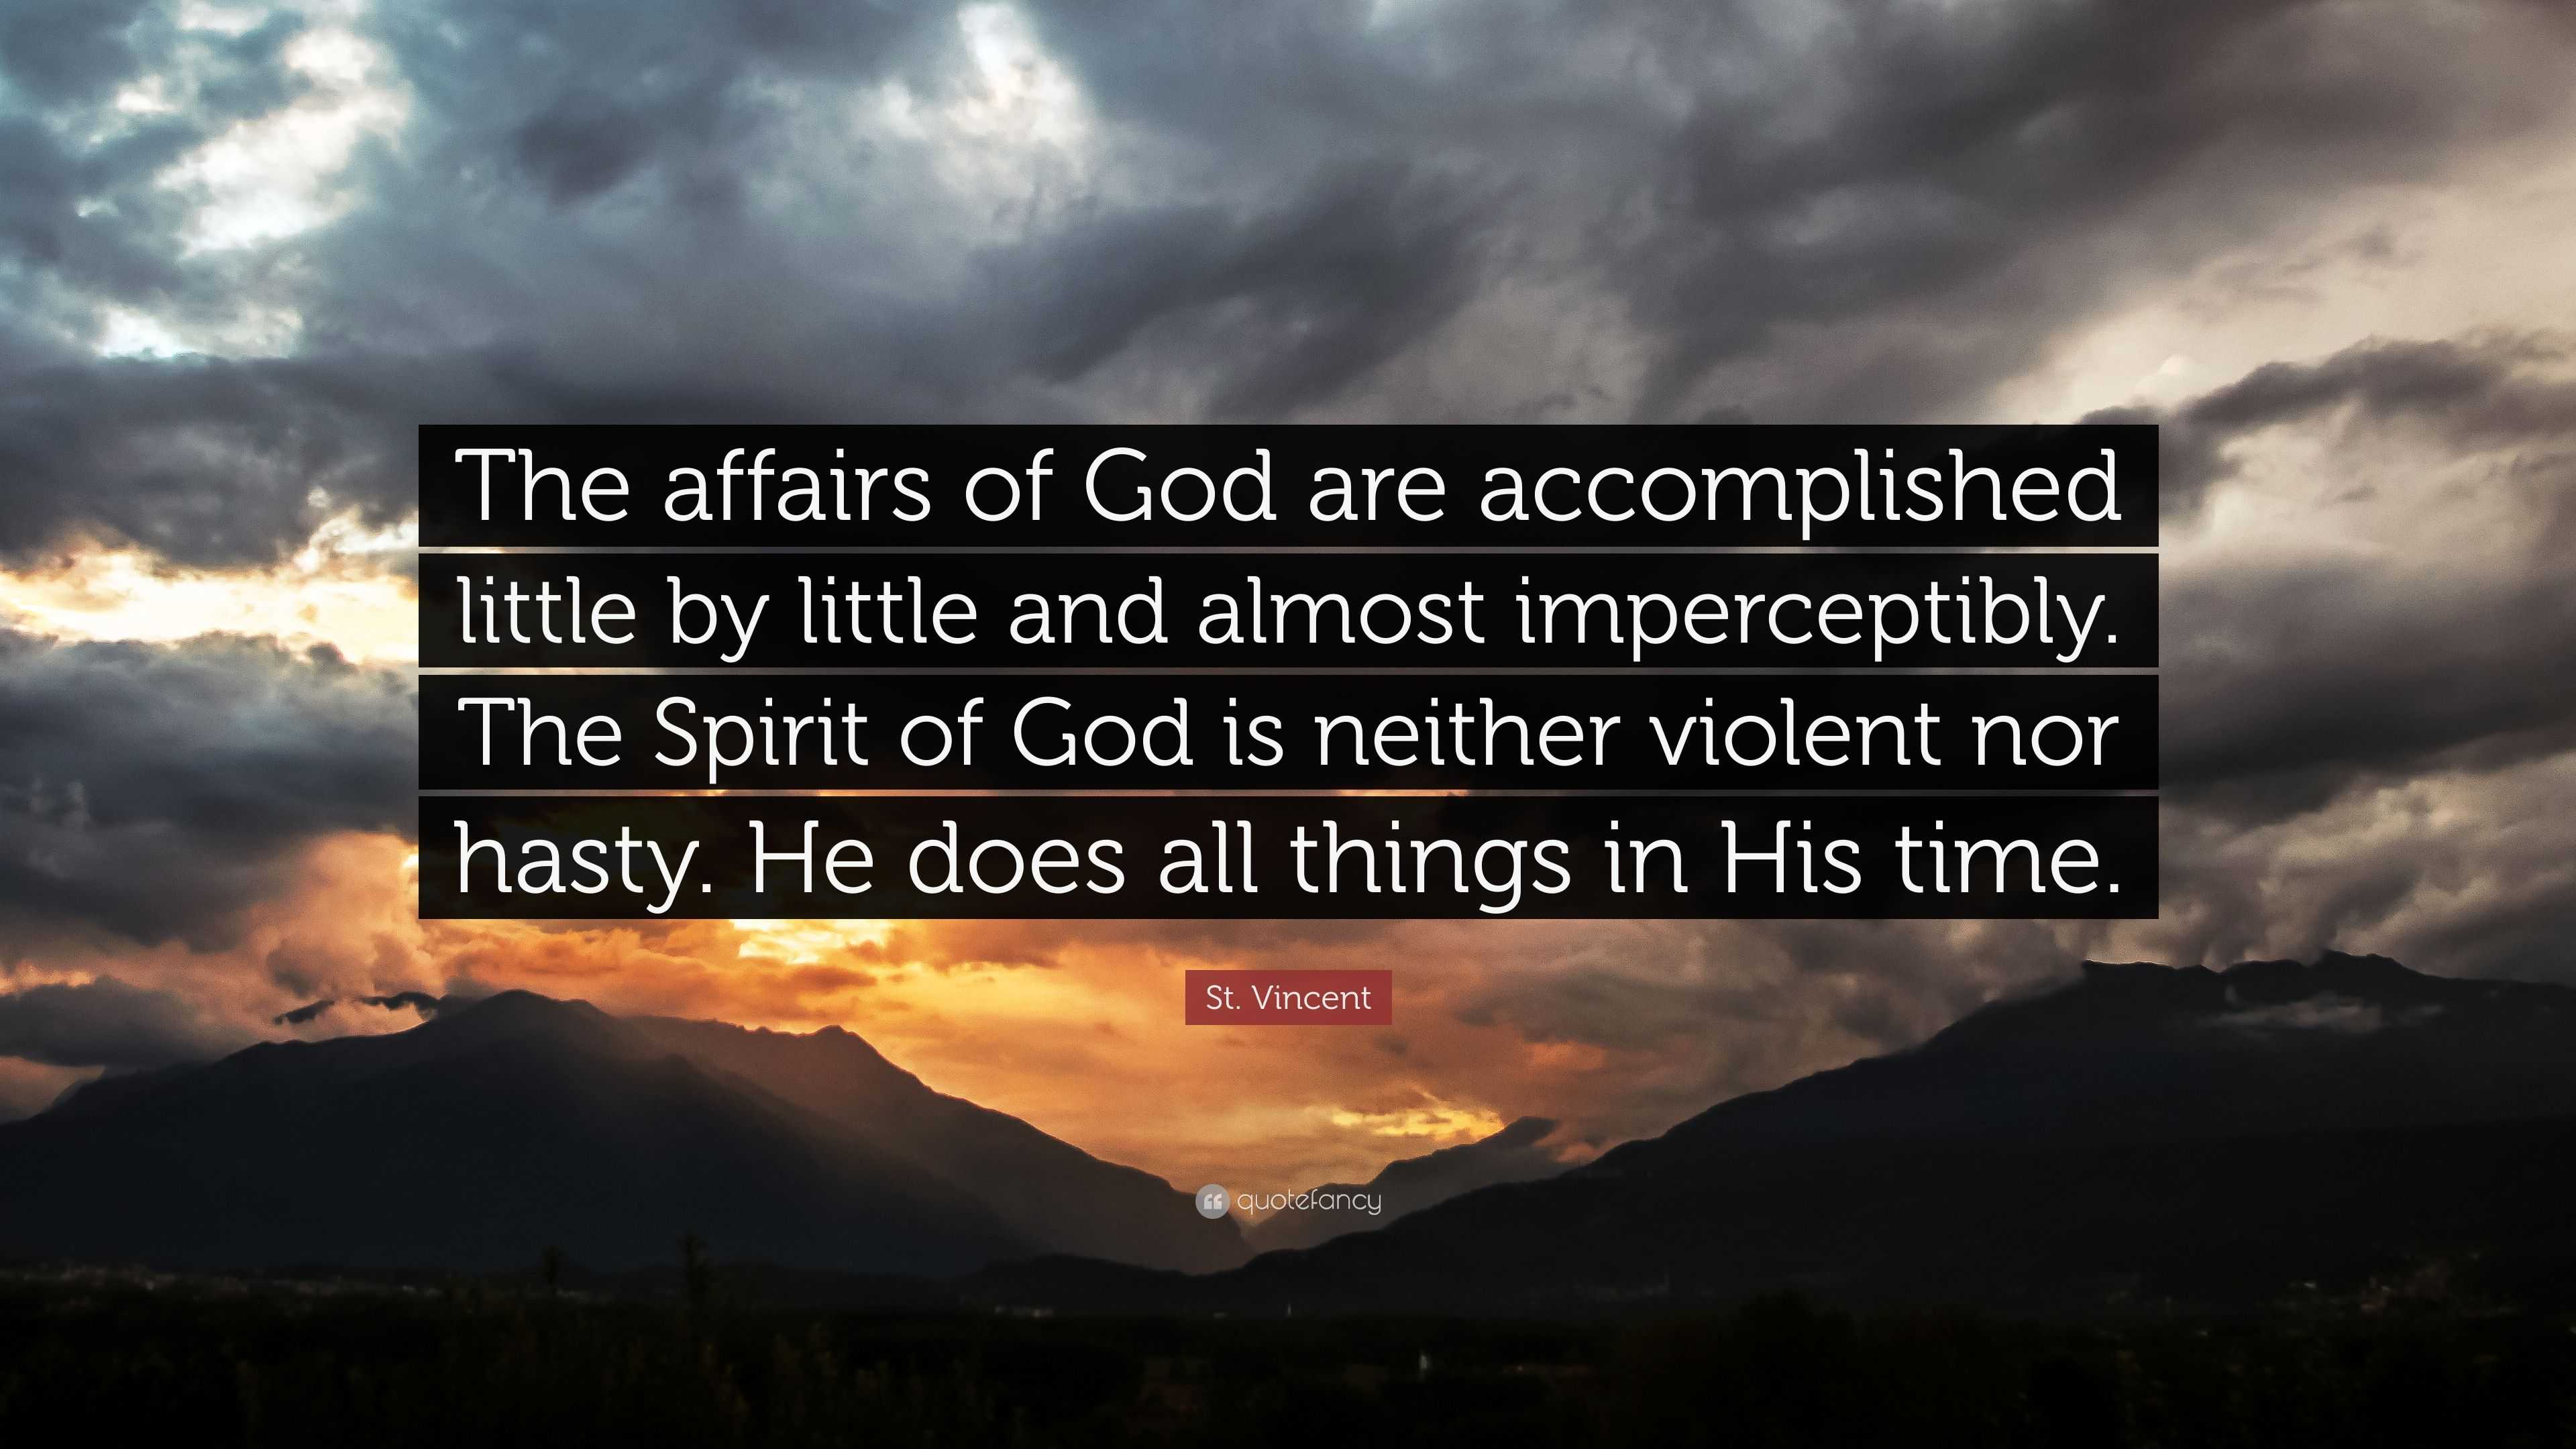 St. Vincent Quote: “The affairs of God are accomplished little by ...